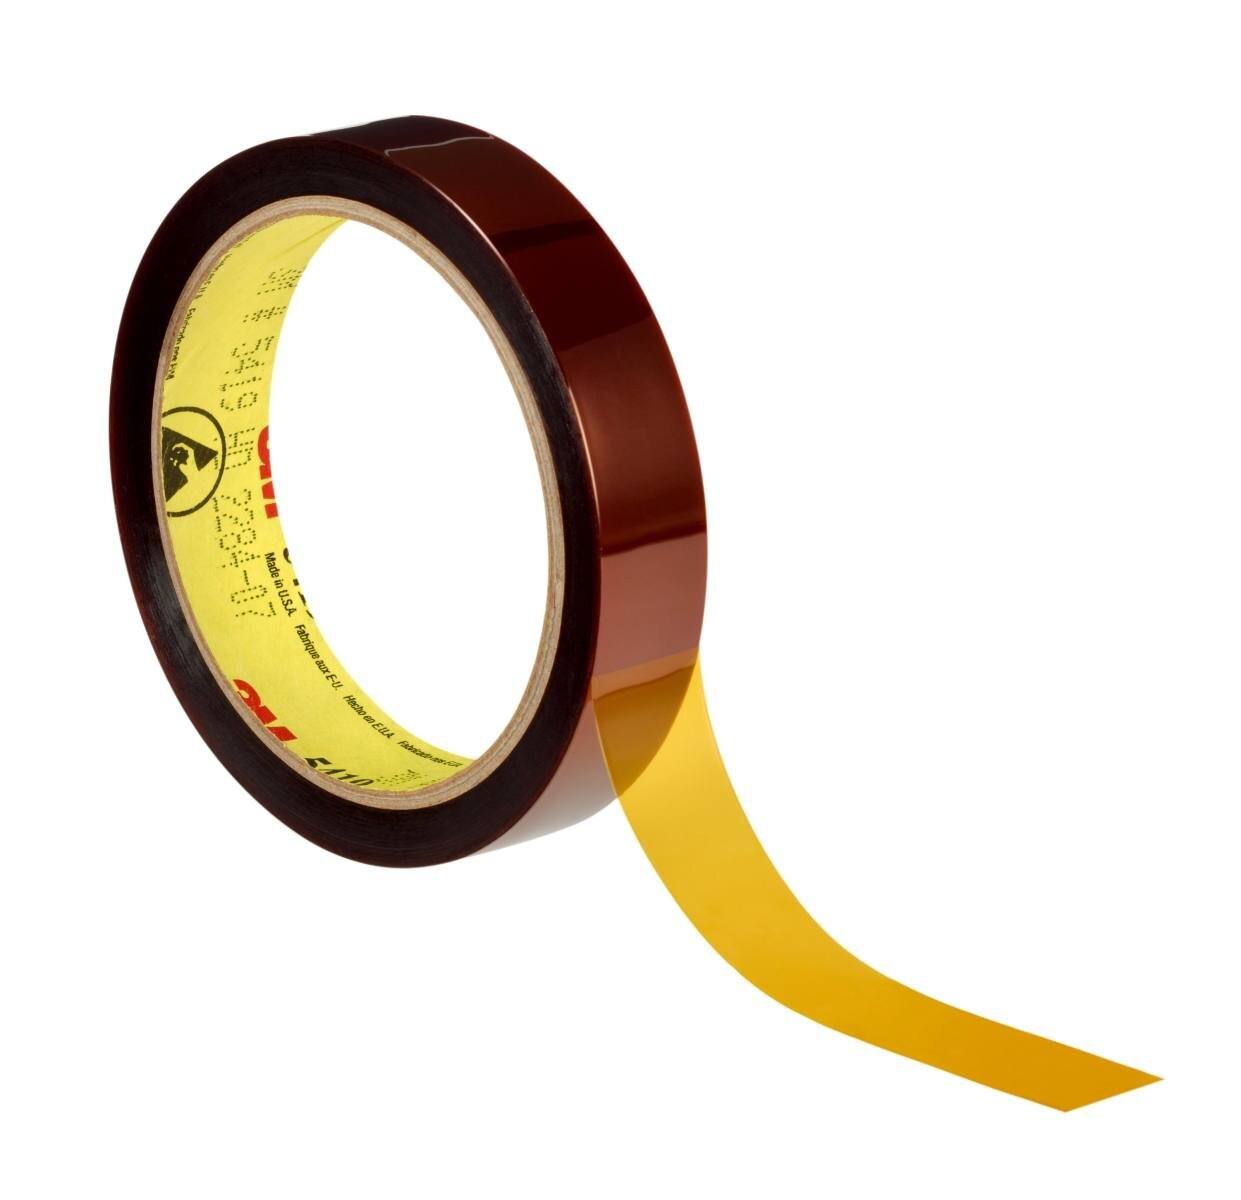 3M High-temperature polyimide adhesive tape 5419, brown, 305 mm x 33 m, 68.58 Âµm